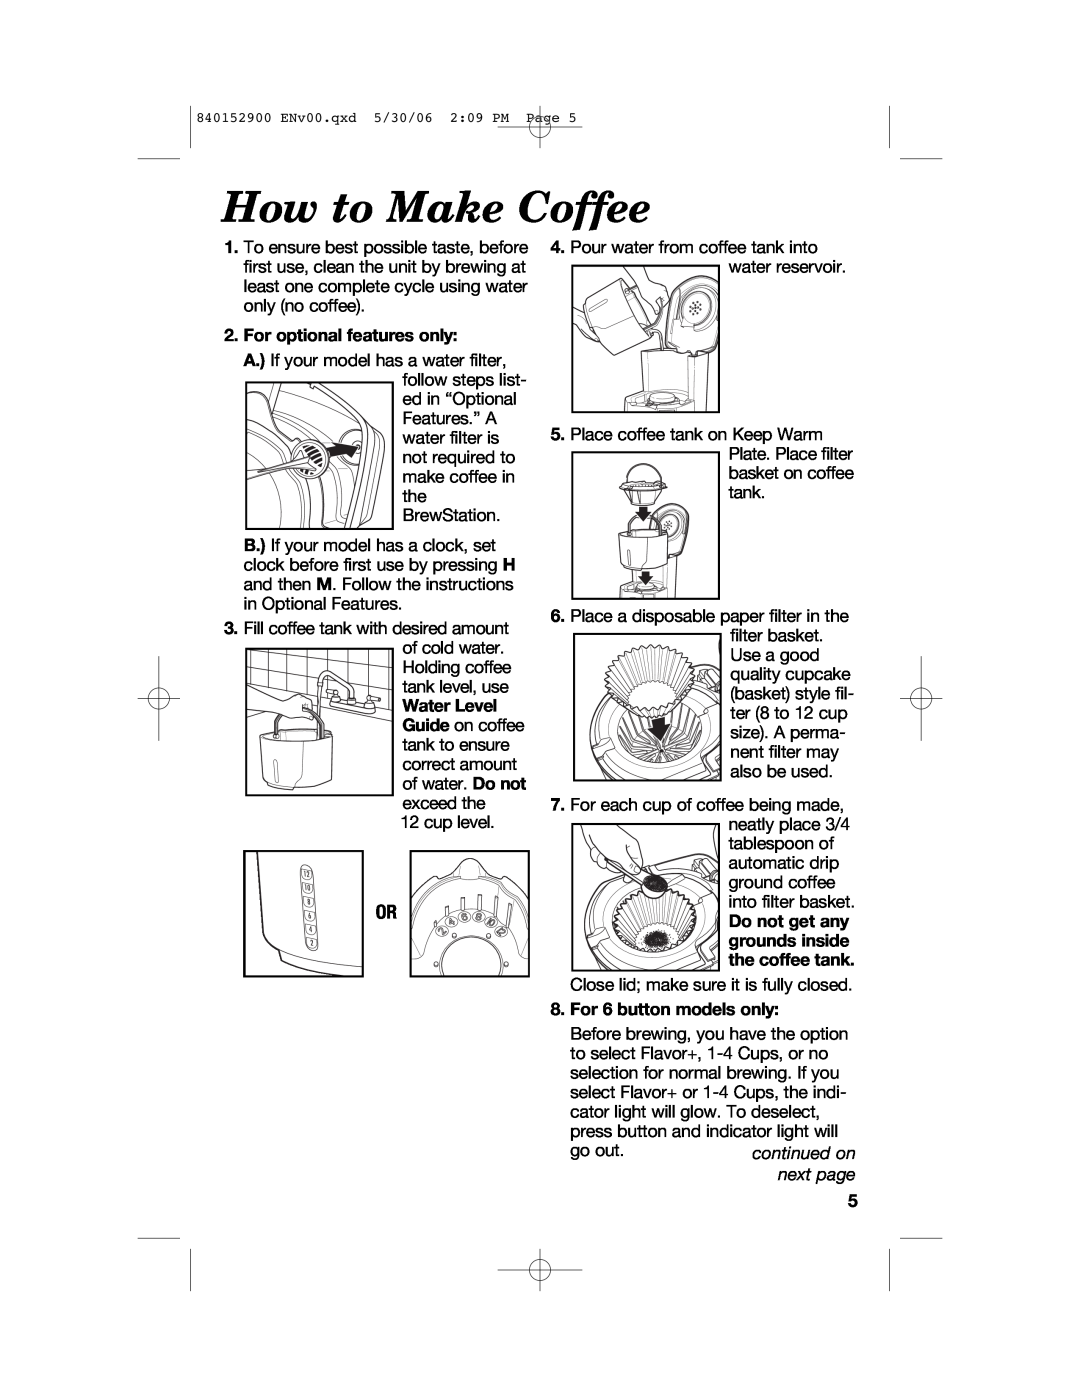 Hamilton Beach 47535C manual How to Make Coffee, For optional features only, Do not get any grounds inside the coffee tank 